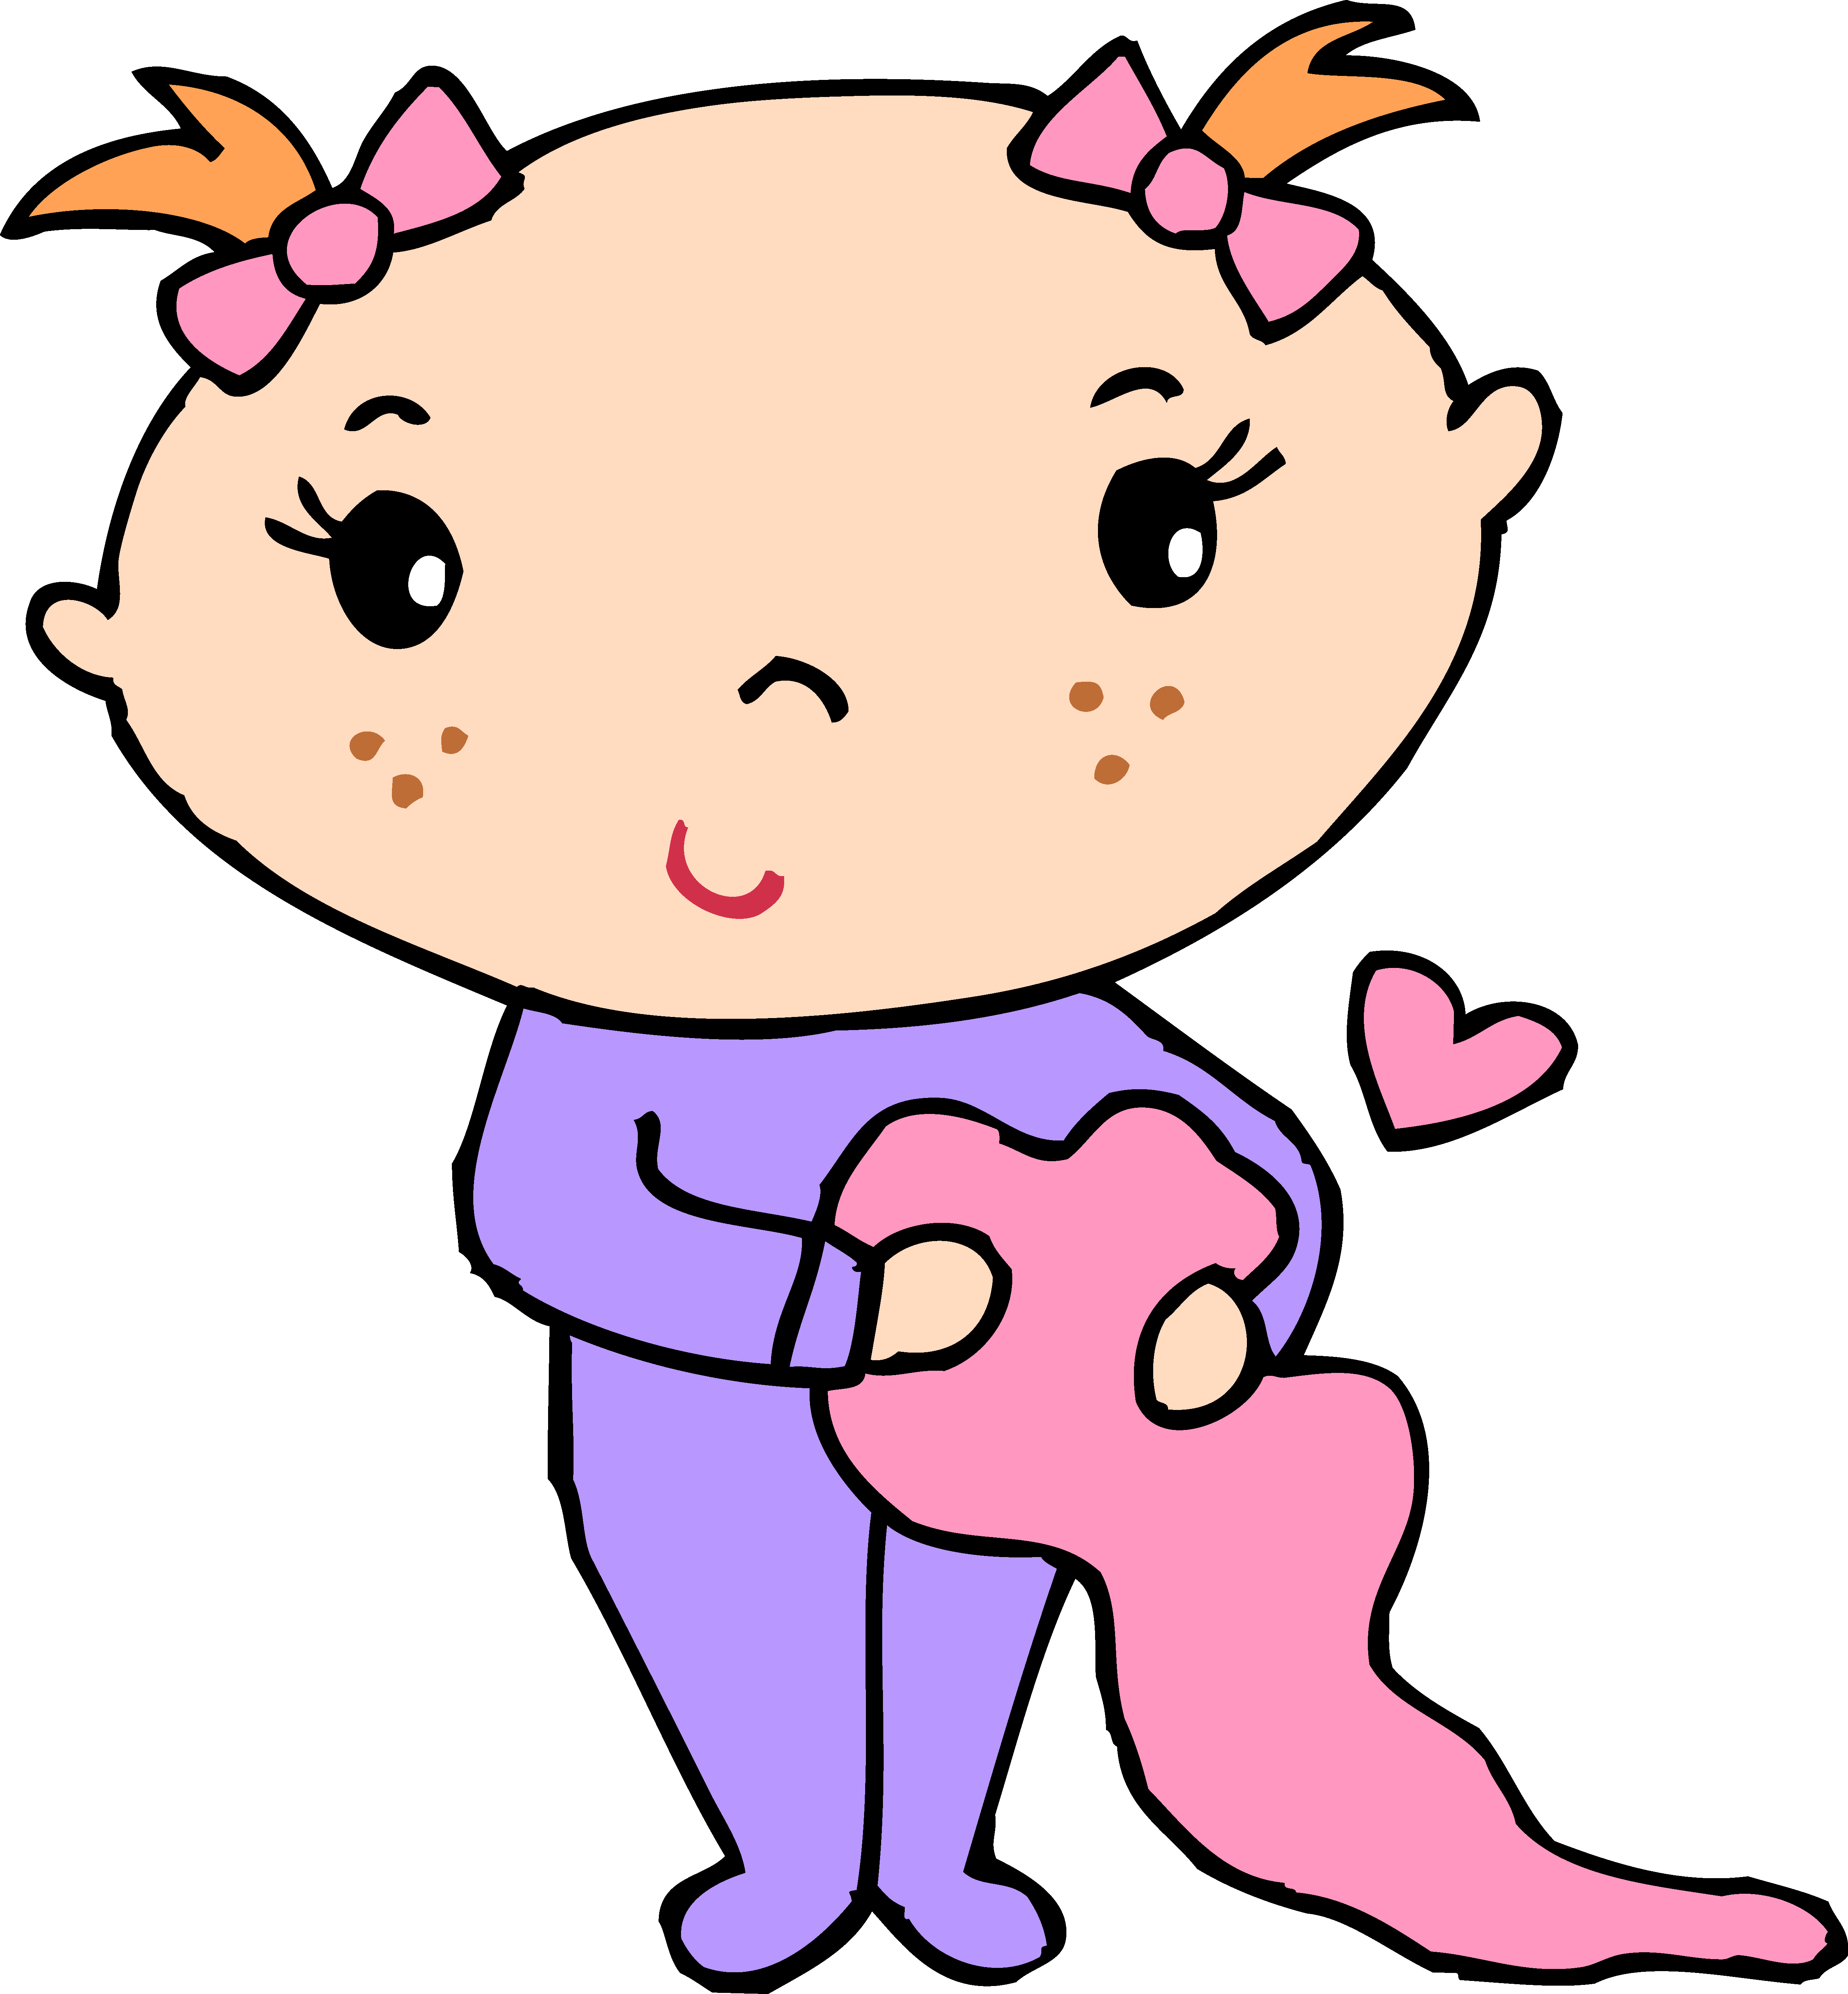 free baby clipart downloads - photo #25